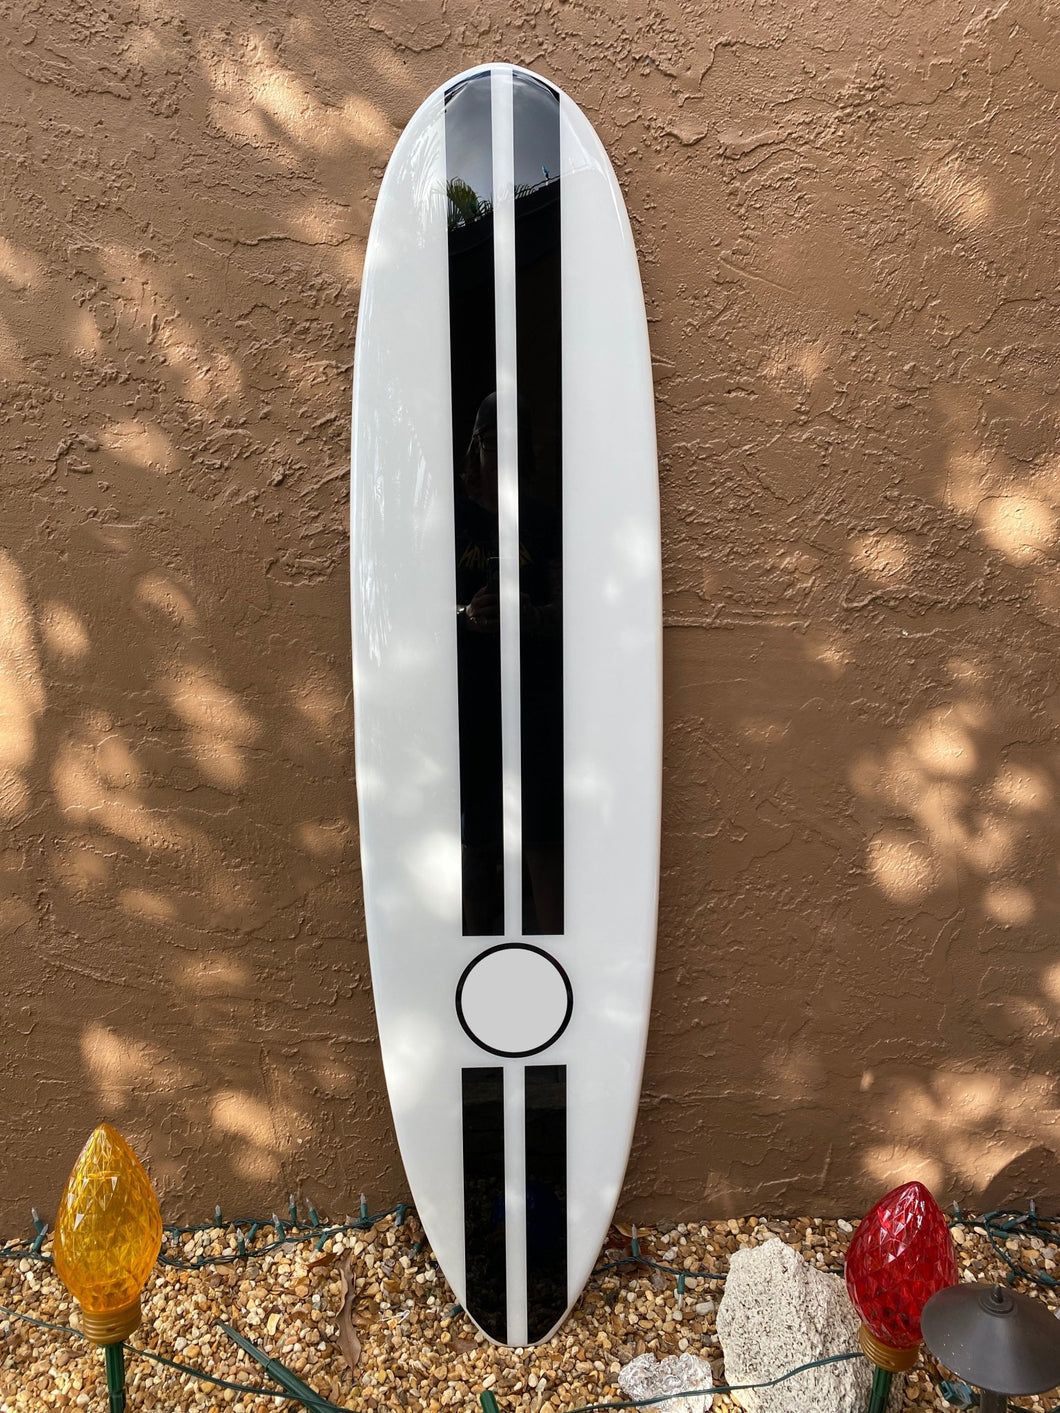 Handcrafted Decorative Surfboard Decor Gallery